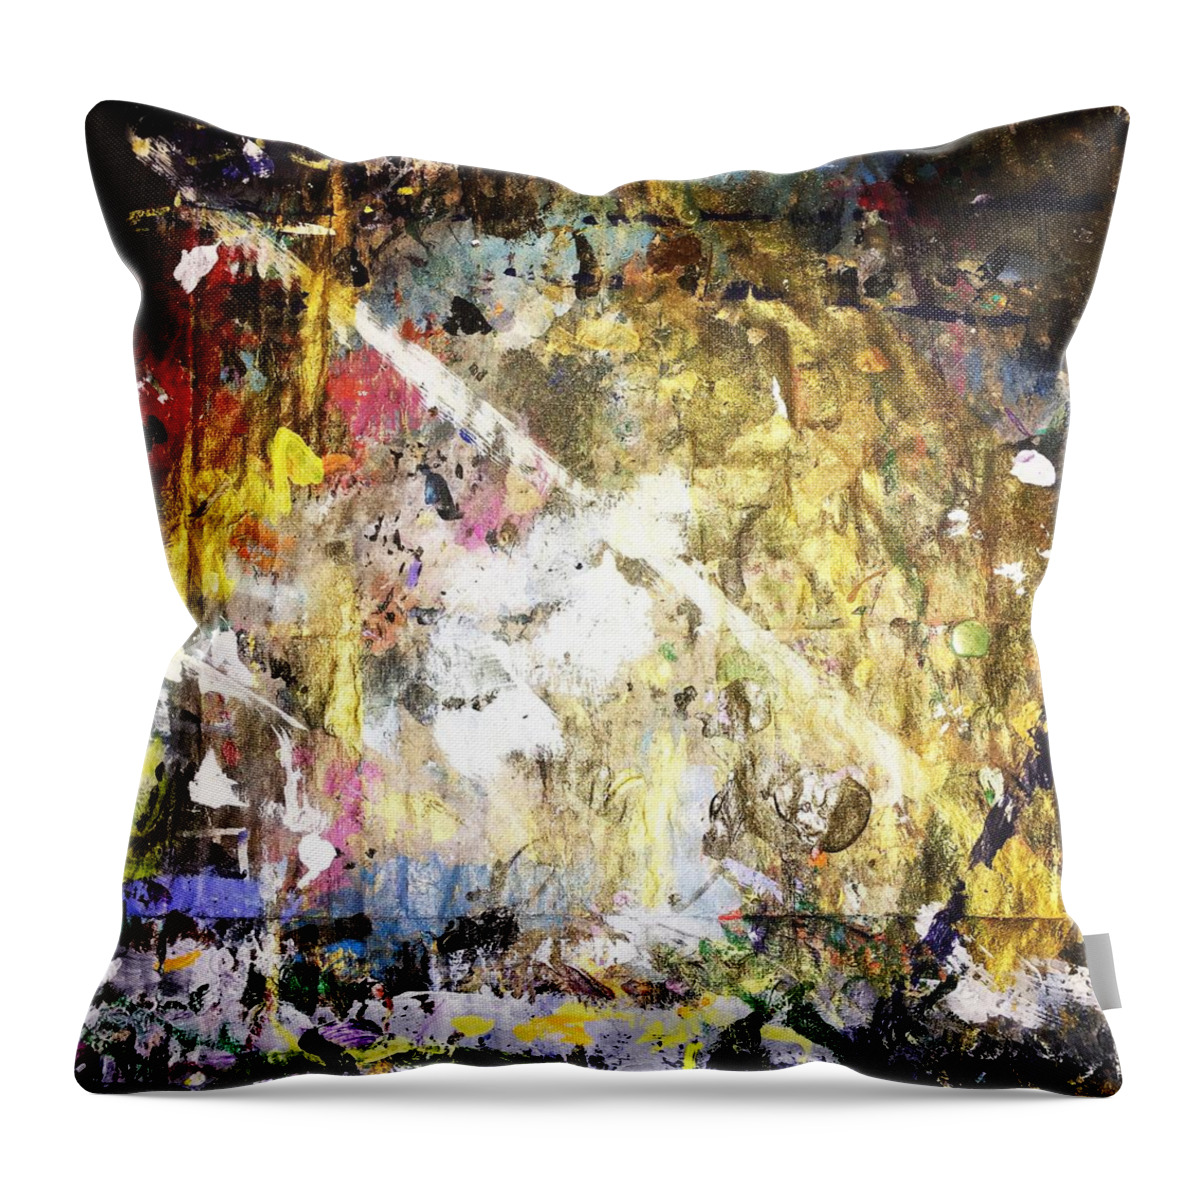 Self-transcendence Throw Pillow featuring the painting Self-Transcendence by Sonye Locksmith